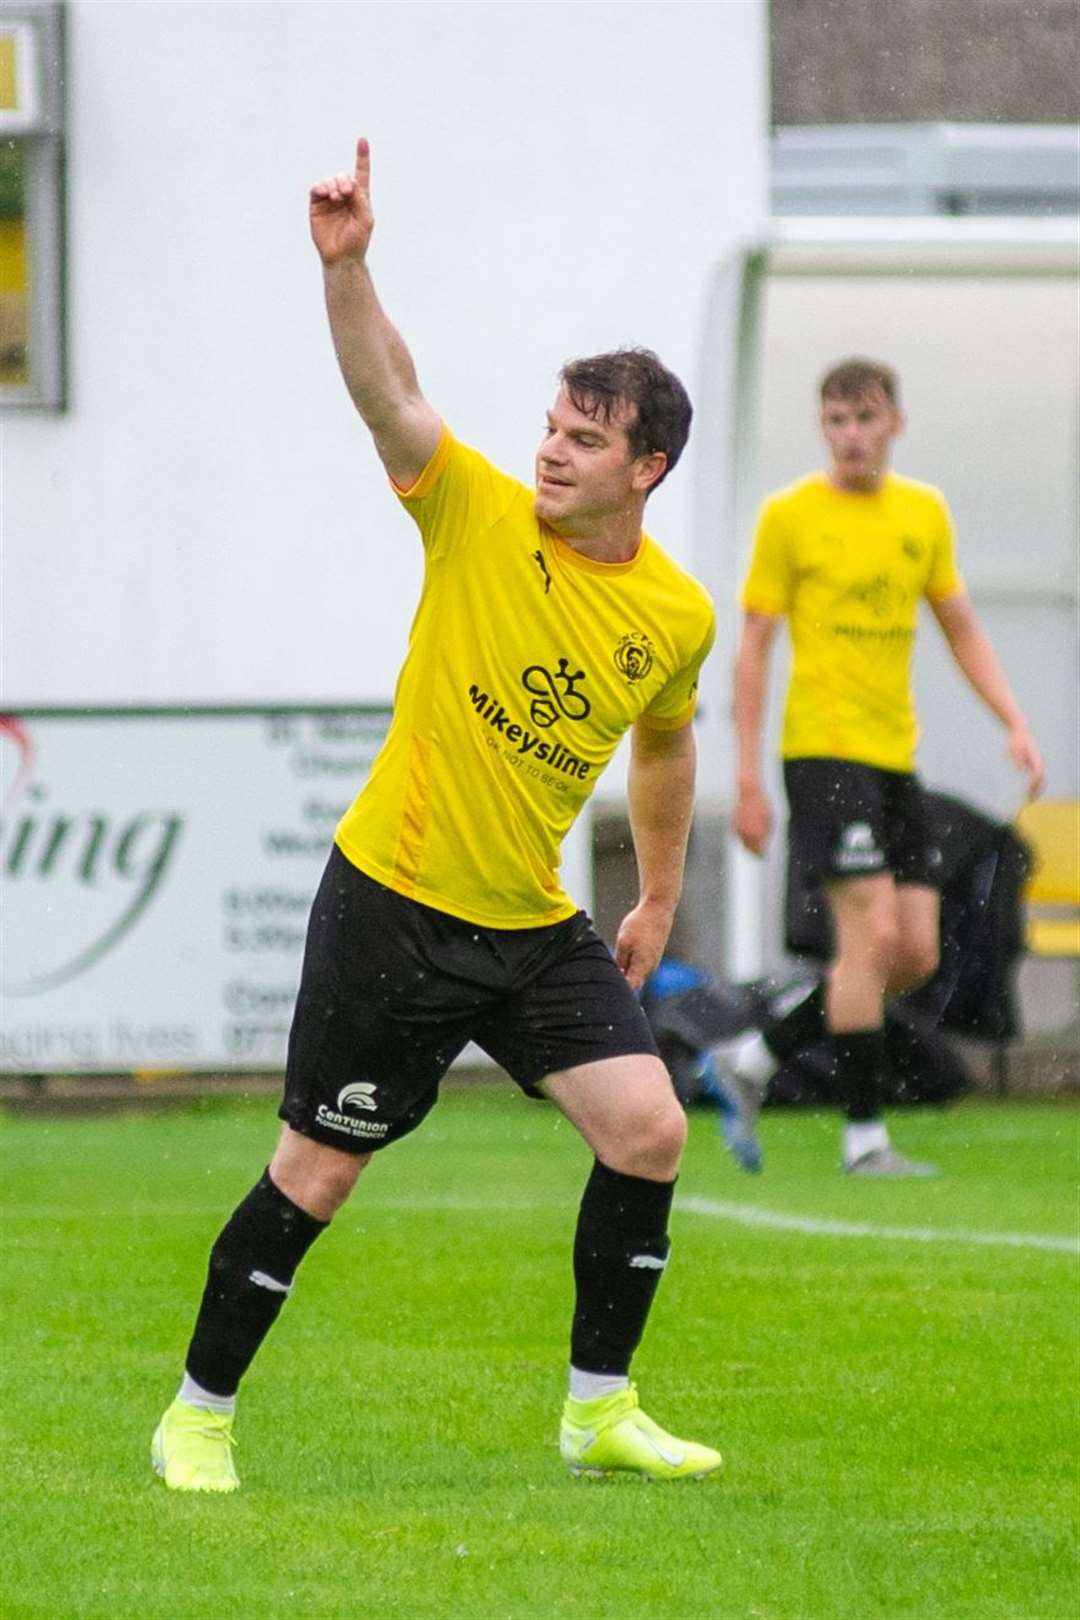 Conor Gethins has been put in temporary charge of the club until a permanent manager is found. Picture: Daniel Forsyth